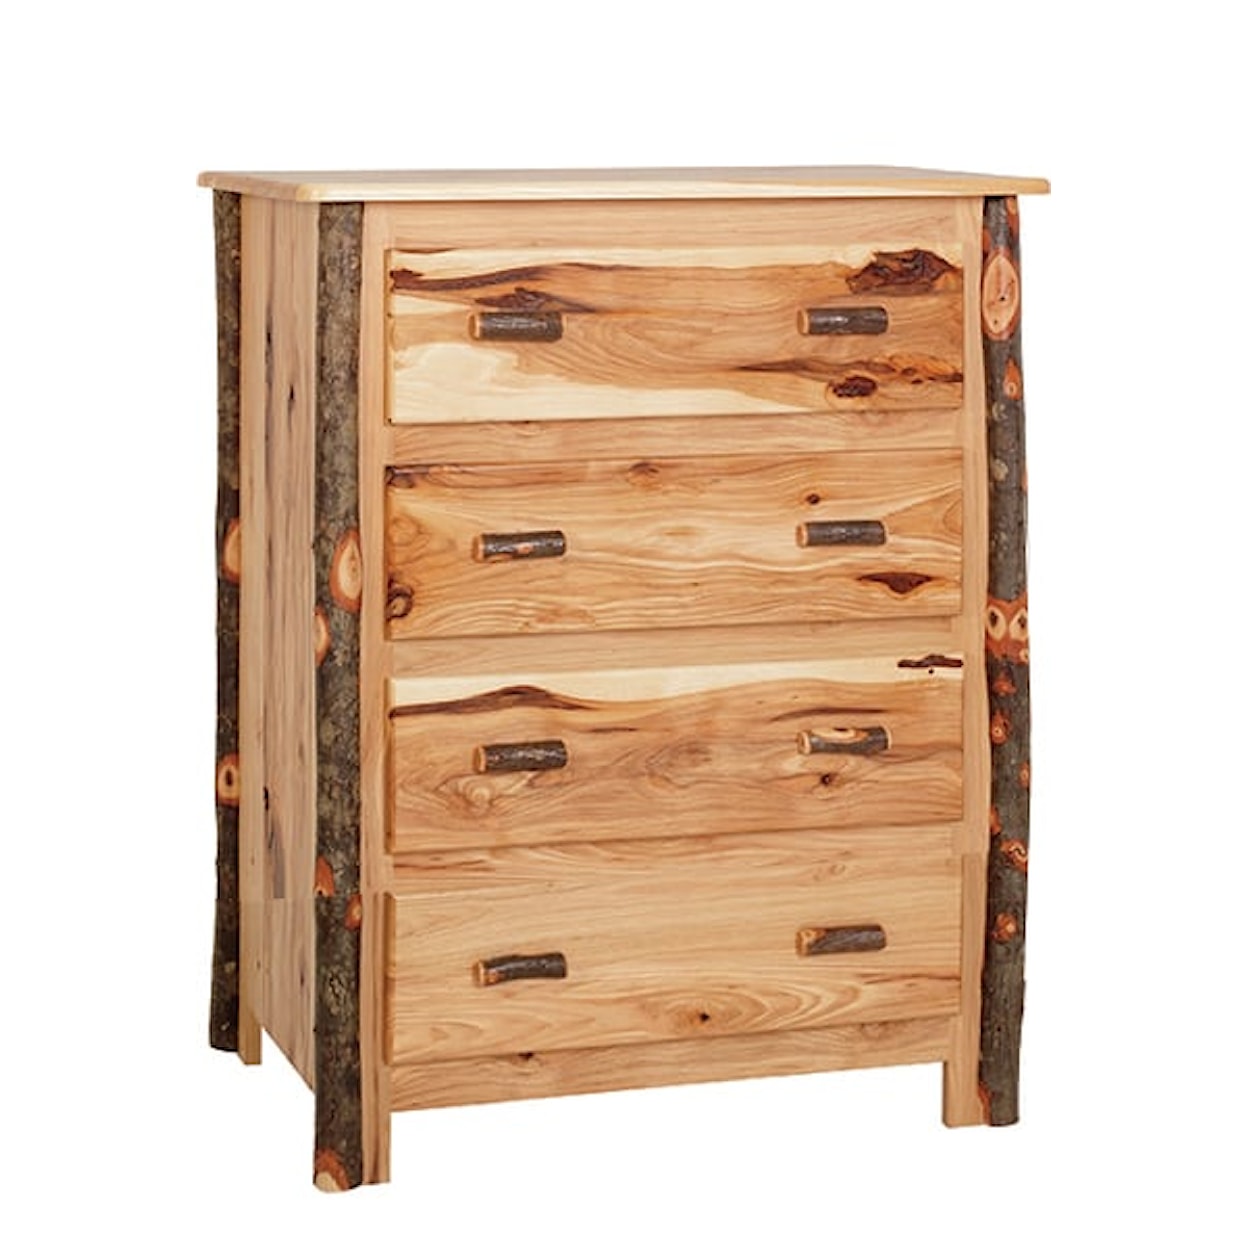 Byler's Rustic Furniture Hickory Collection 4 Drawer Chest